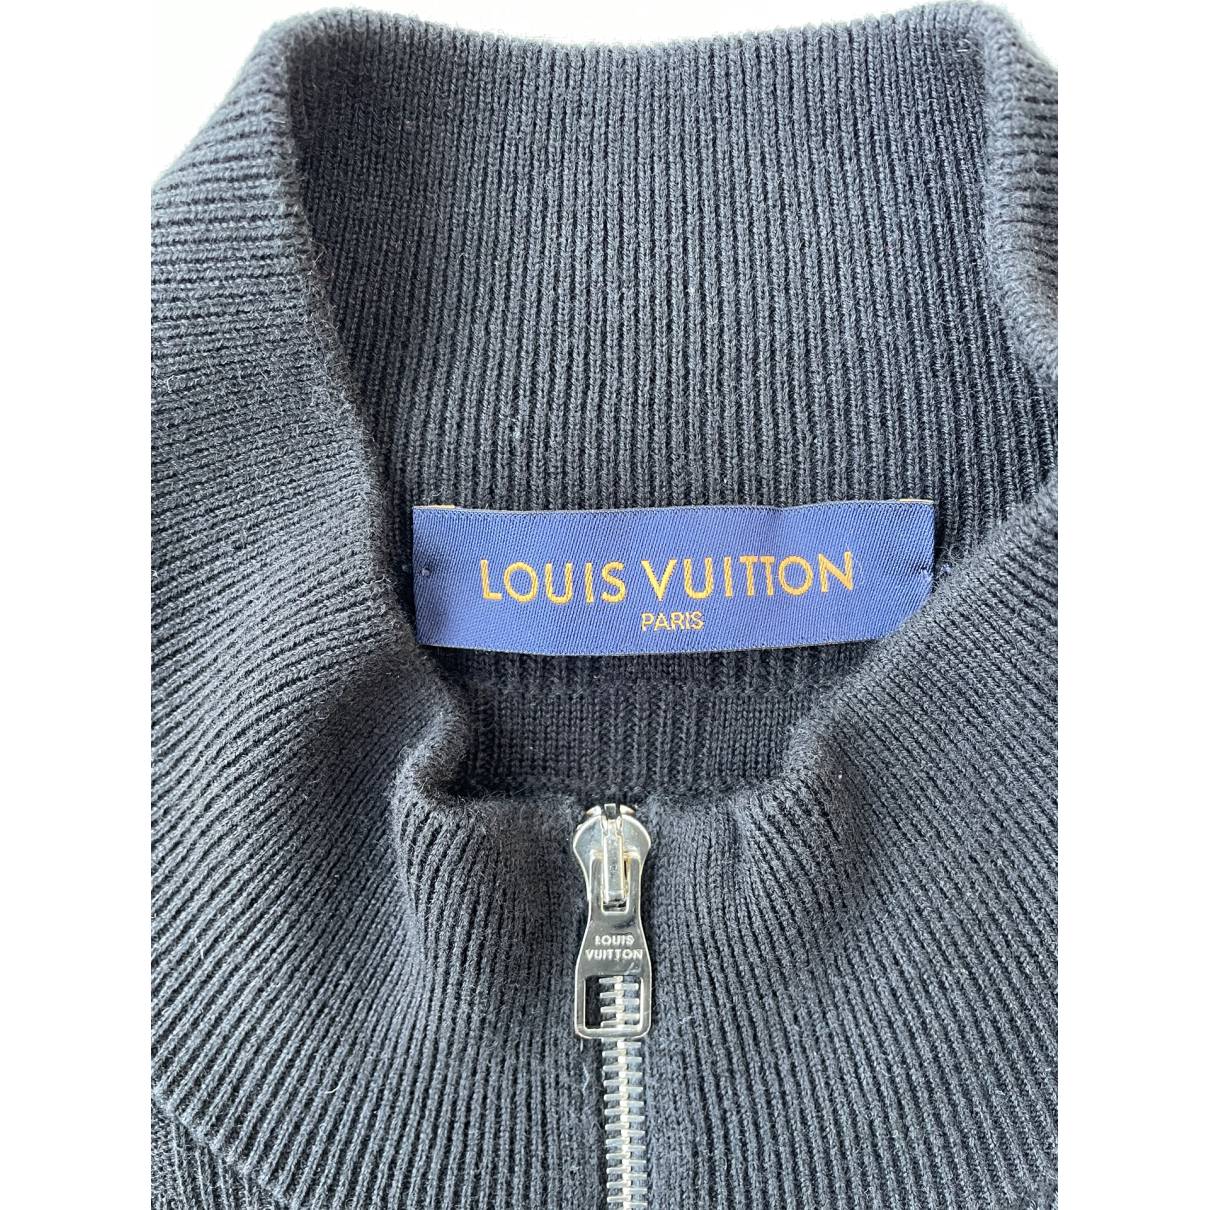 Louis Vuitton - Authenticated Sweatshirt - Wool Black For Man, Very Good condition